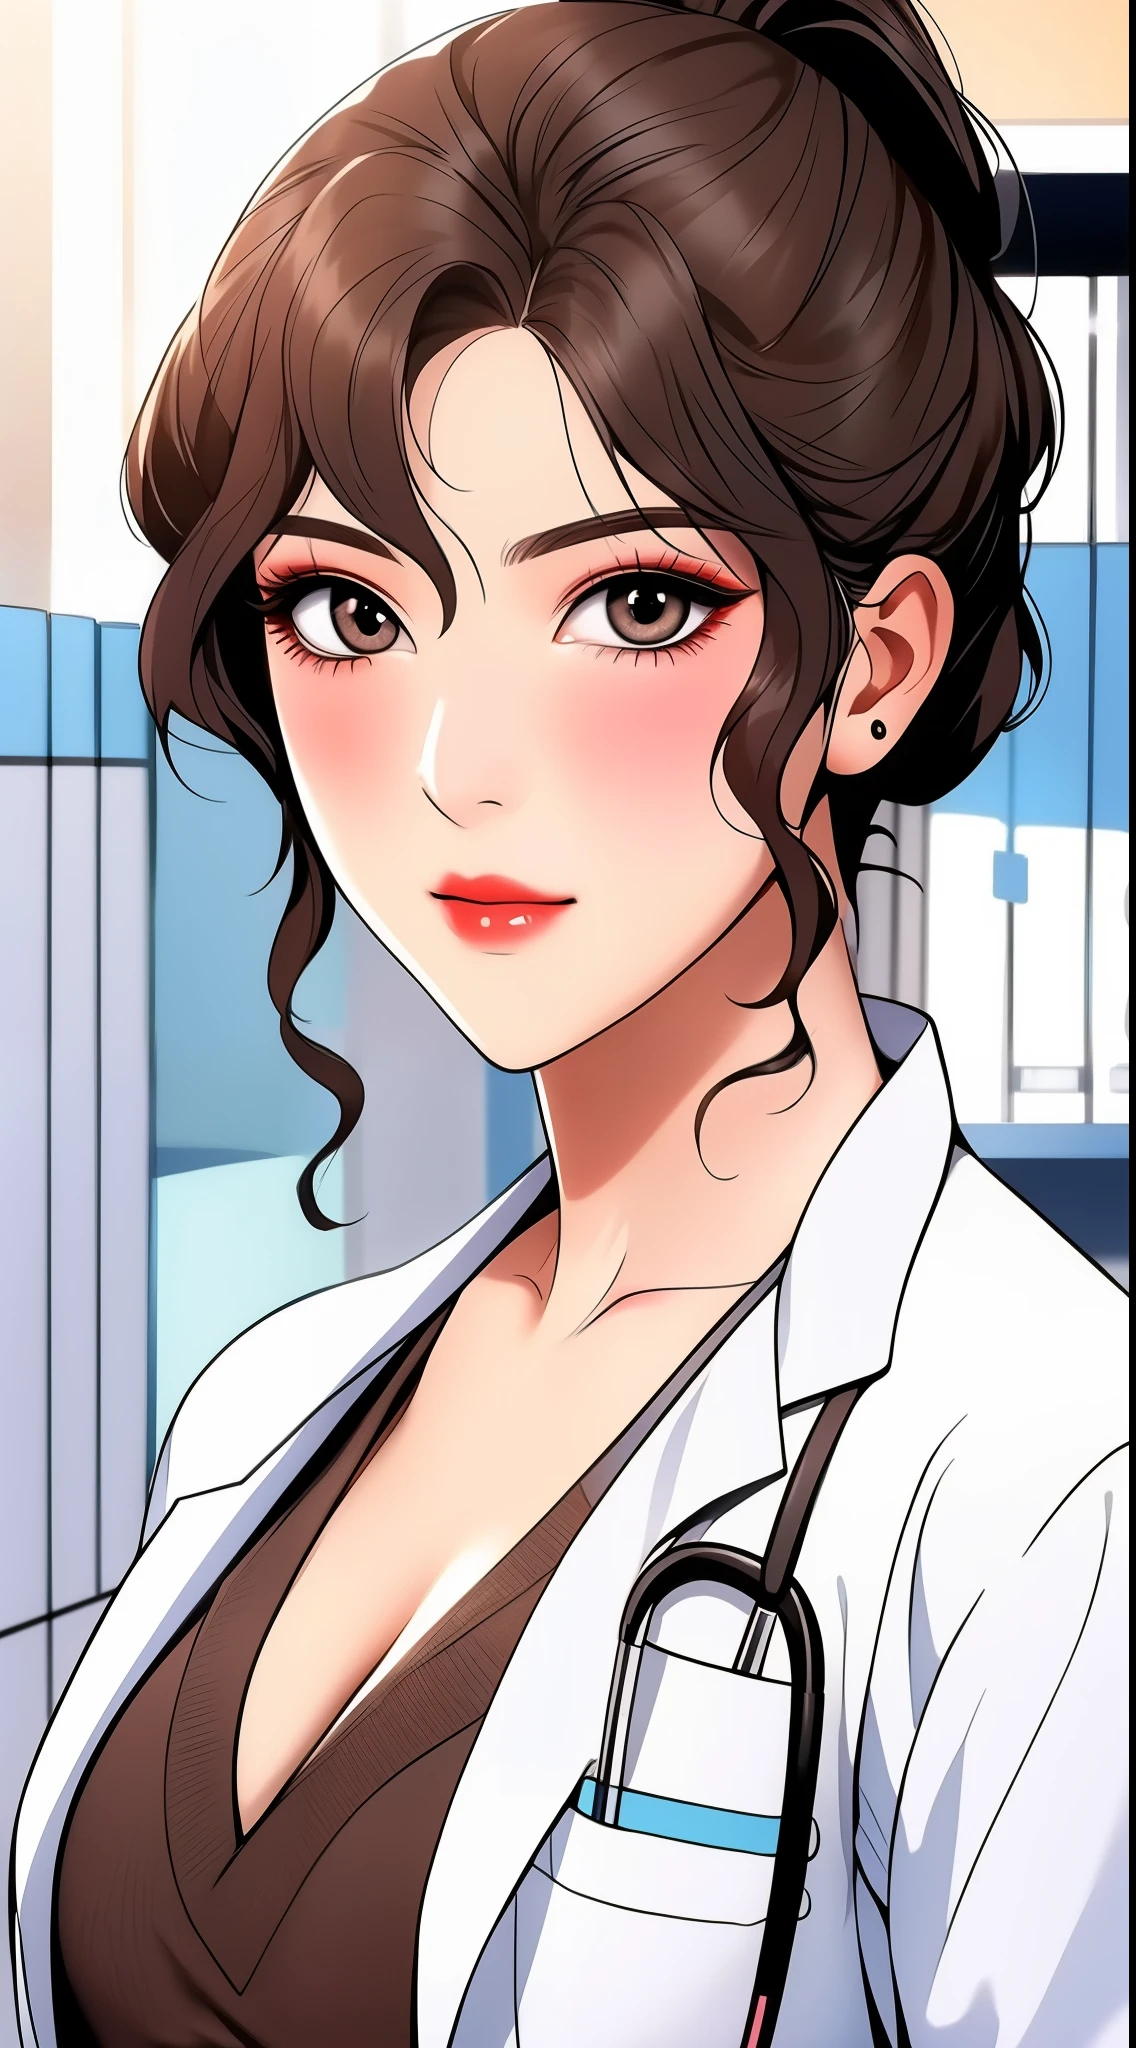 (beautiful hand:1.2), (masterpiece, best quality:1.3), Aiko Katsuragi, mature female, beautiful face, pretty face, (half body shot:1.05), 1girl, makeup, big breasts, lipstick, brown glowing eyes, folded ponytail, brown hair, cleavage, perfect body, (:1.3), (doctor, labcoat:1.2),  perfect eyes, perfect retina, blushed, eyeliner, eyeshadow, perfect face, smile (caring look:1.1), look at viewer, high sharpness, sharp focus, medical room, professional artwork, intricate details, vivid colors, Diffused lighting, digital blending, ultra detailed body, ultra detailed hair, ultra detailed face, trending on pixiv, for desktop wallpaper, flawless drawn